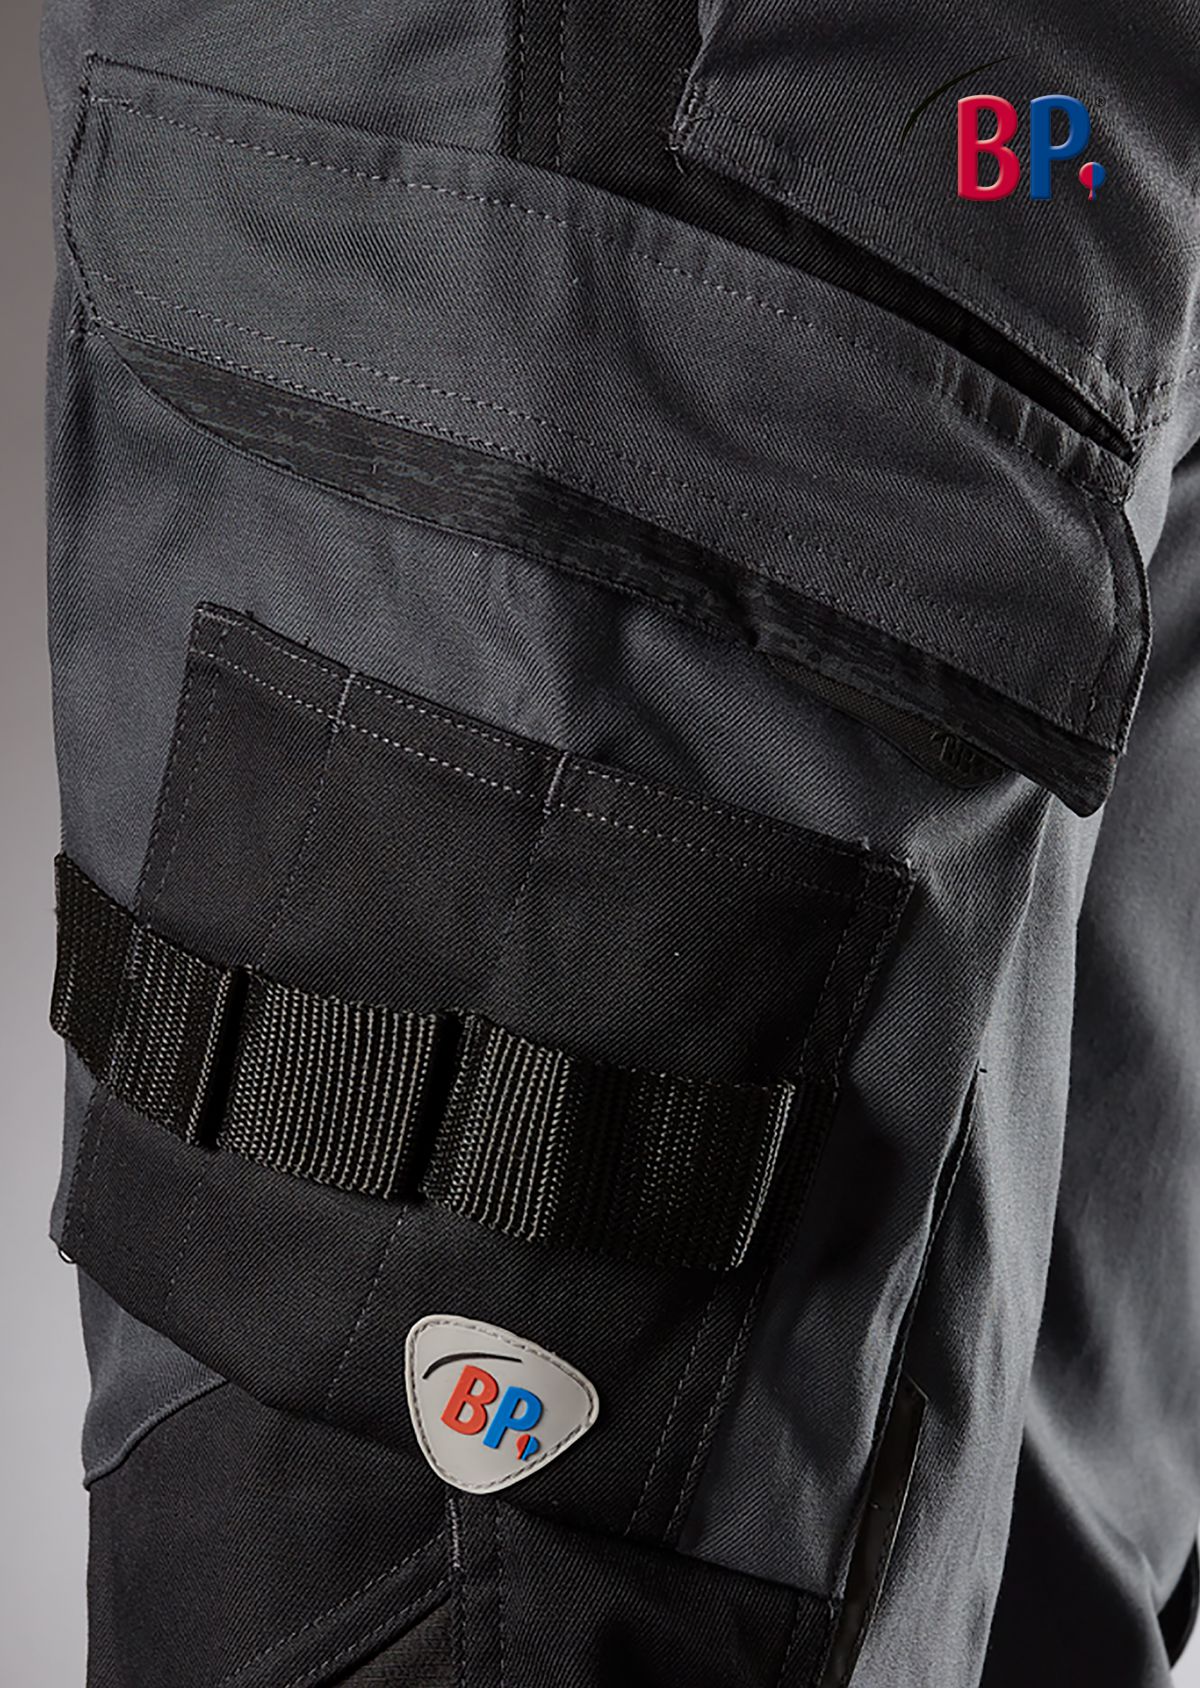 BP® Stretch work trousers